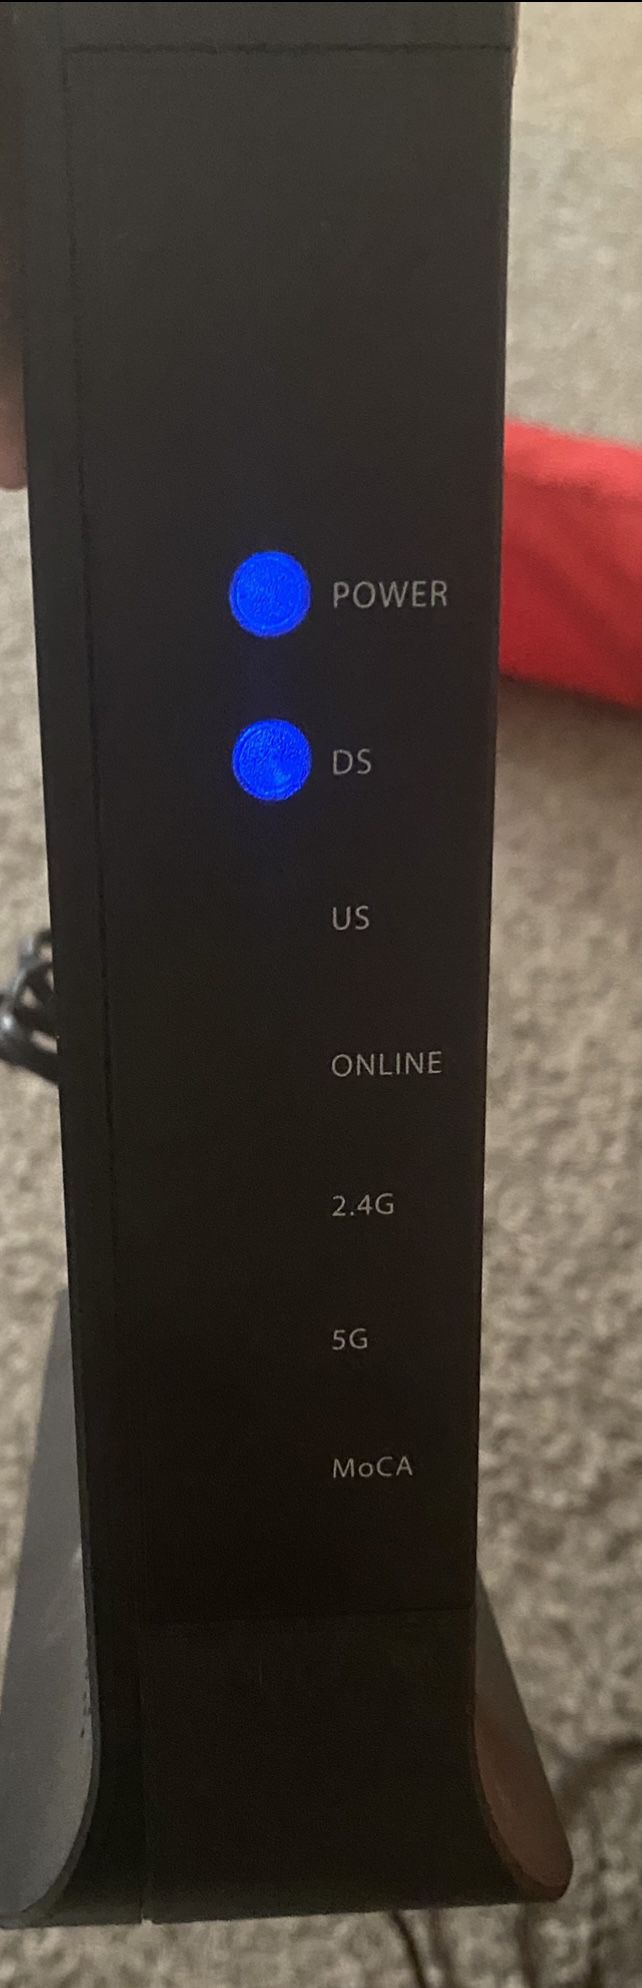 Ubee Router Modem Combo- Includes Cables